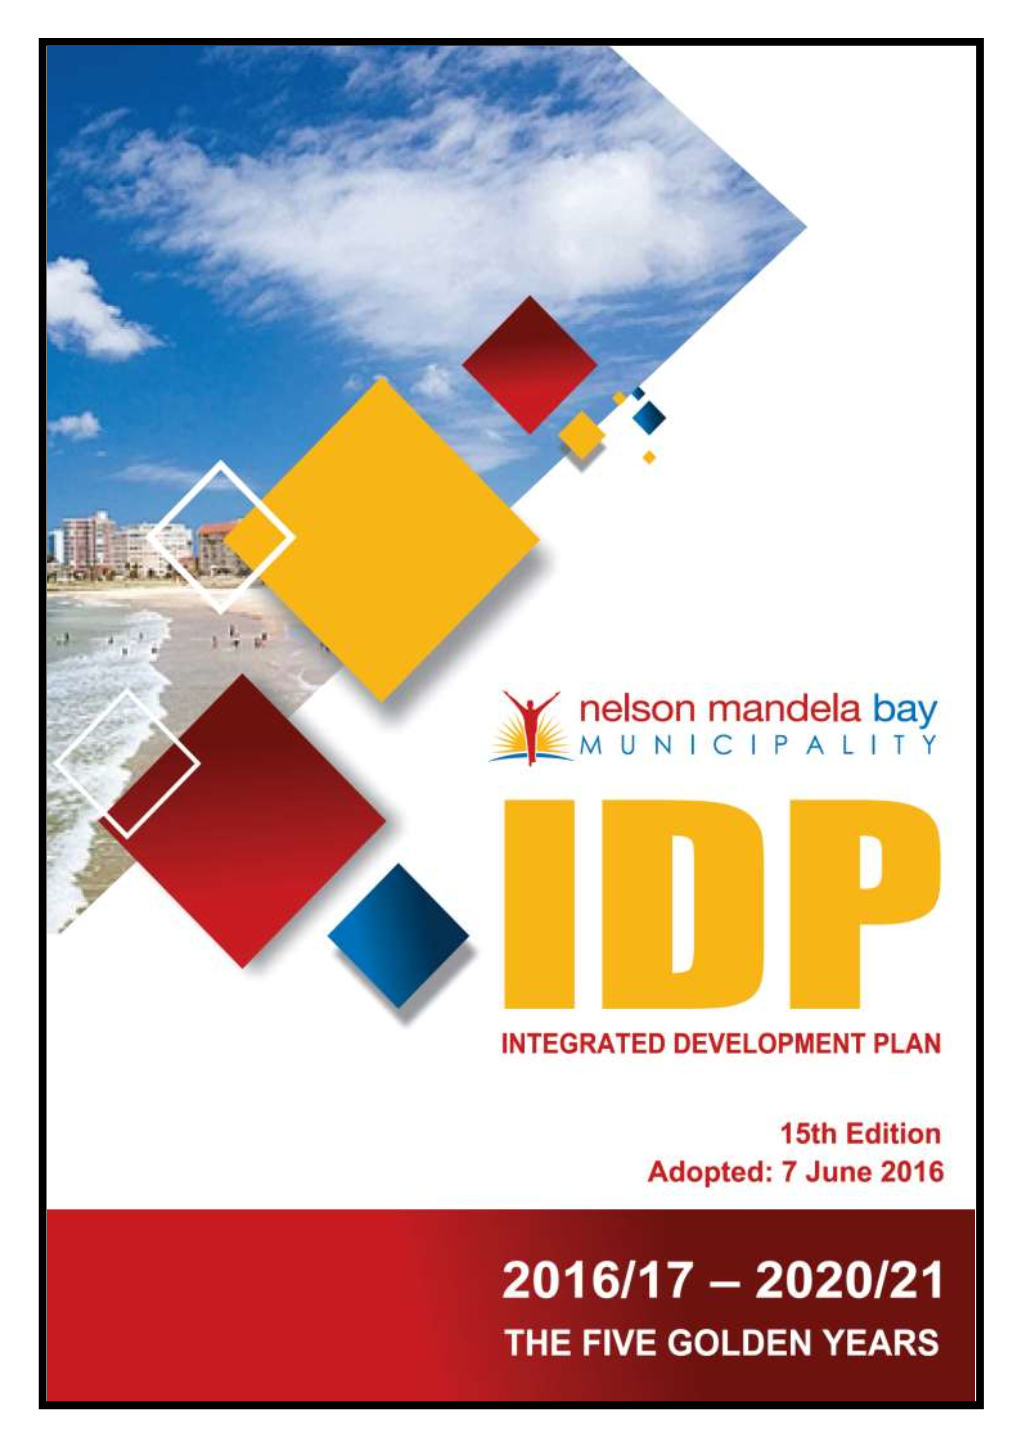 IDP (2016/17) in Place City Manager, CFO and COO 31-Dec-15